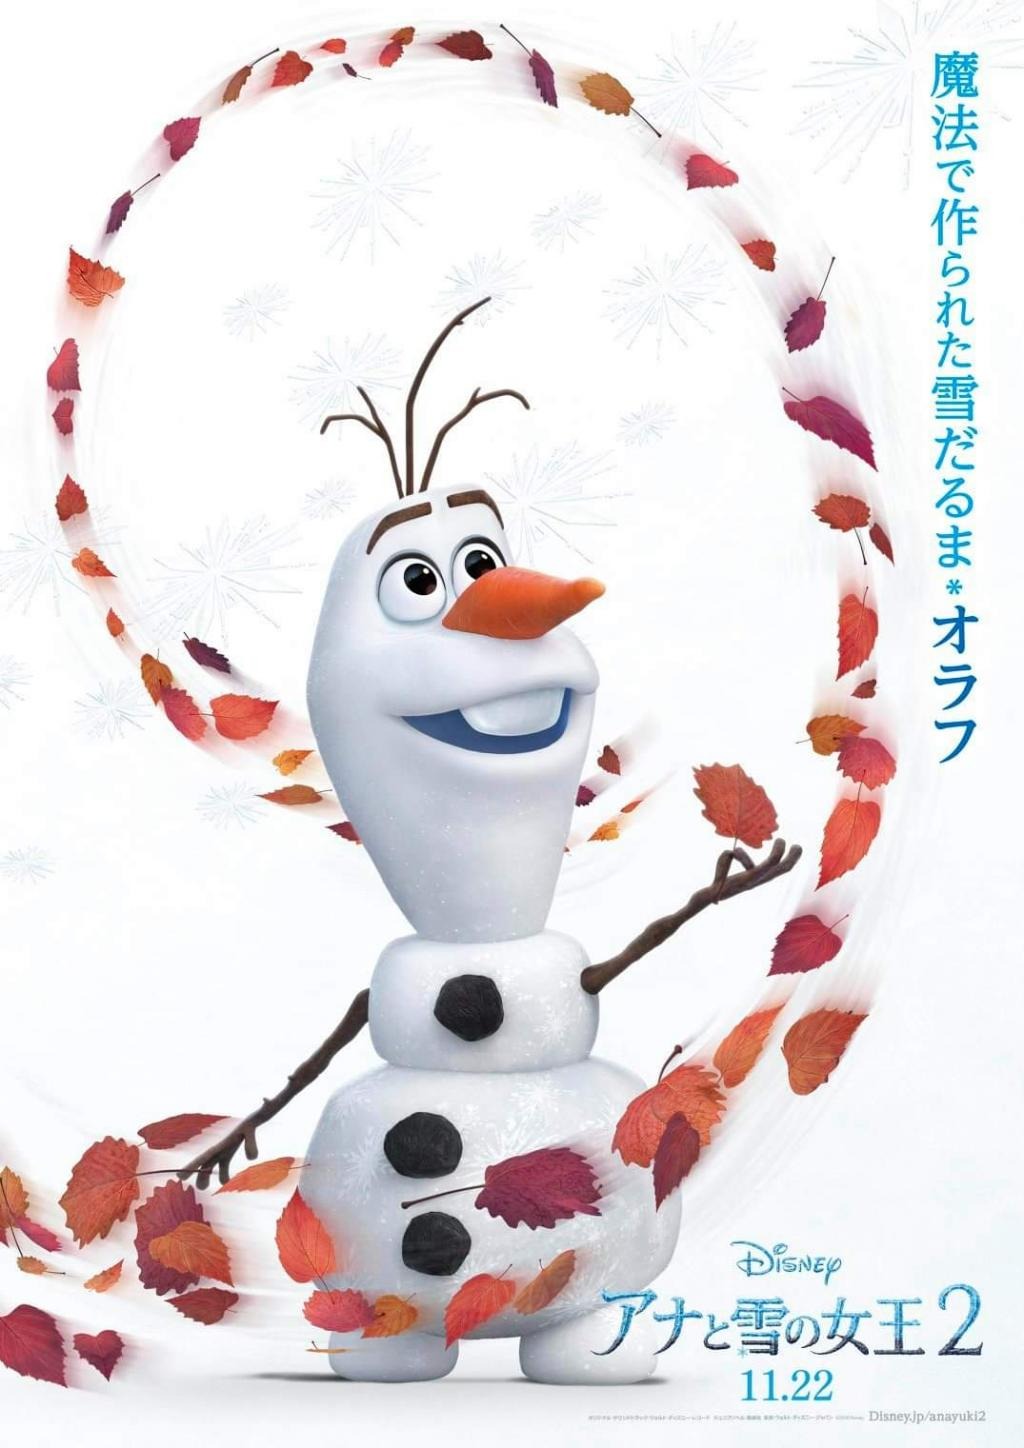 Extra Large Movie Poster Image for Frozen 2 (#13 of 31)